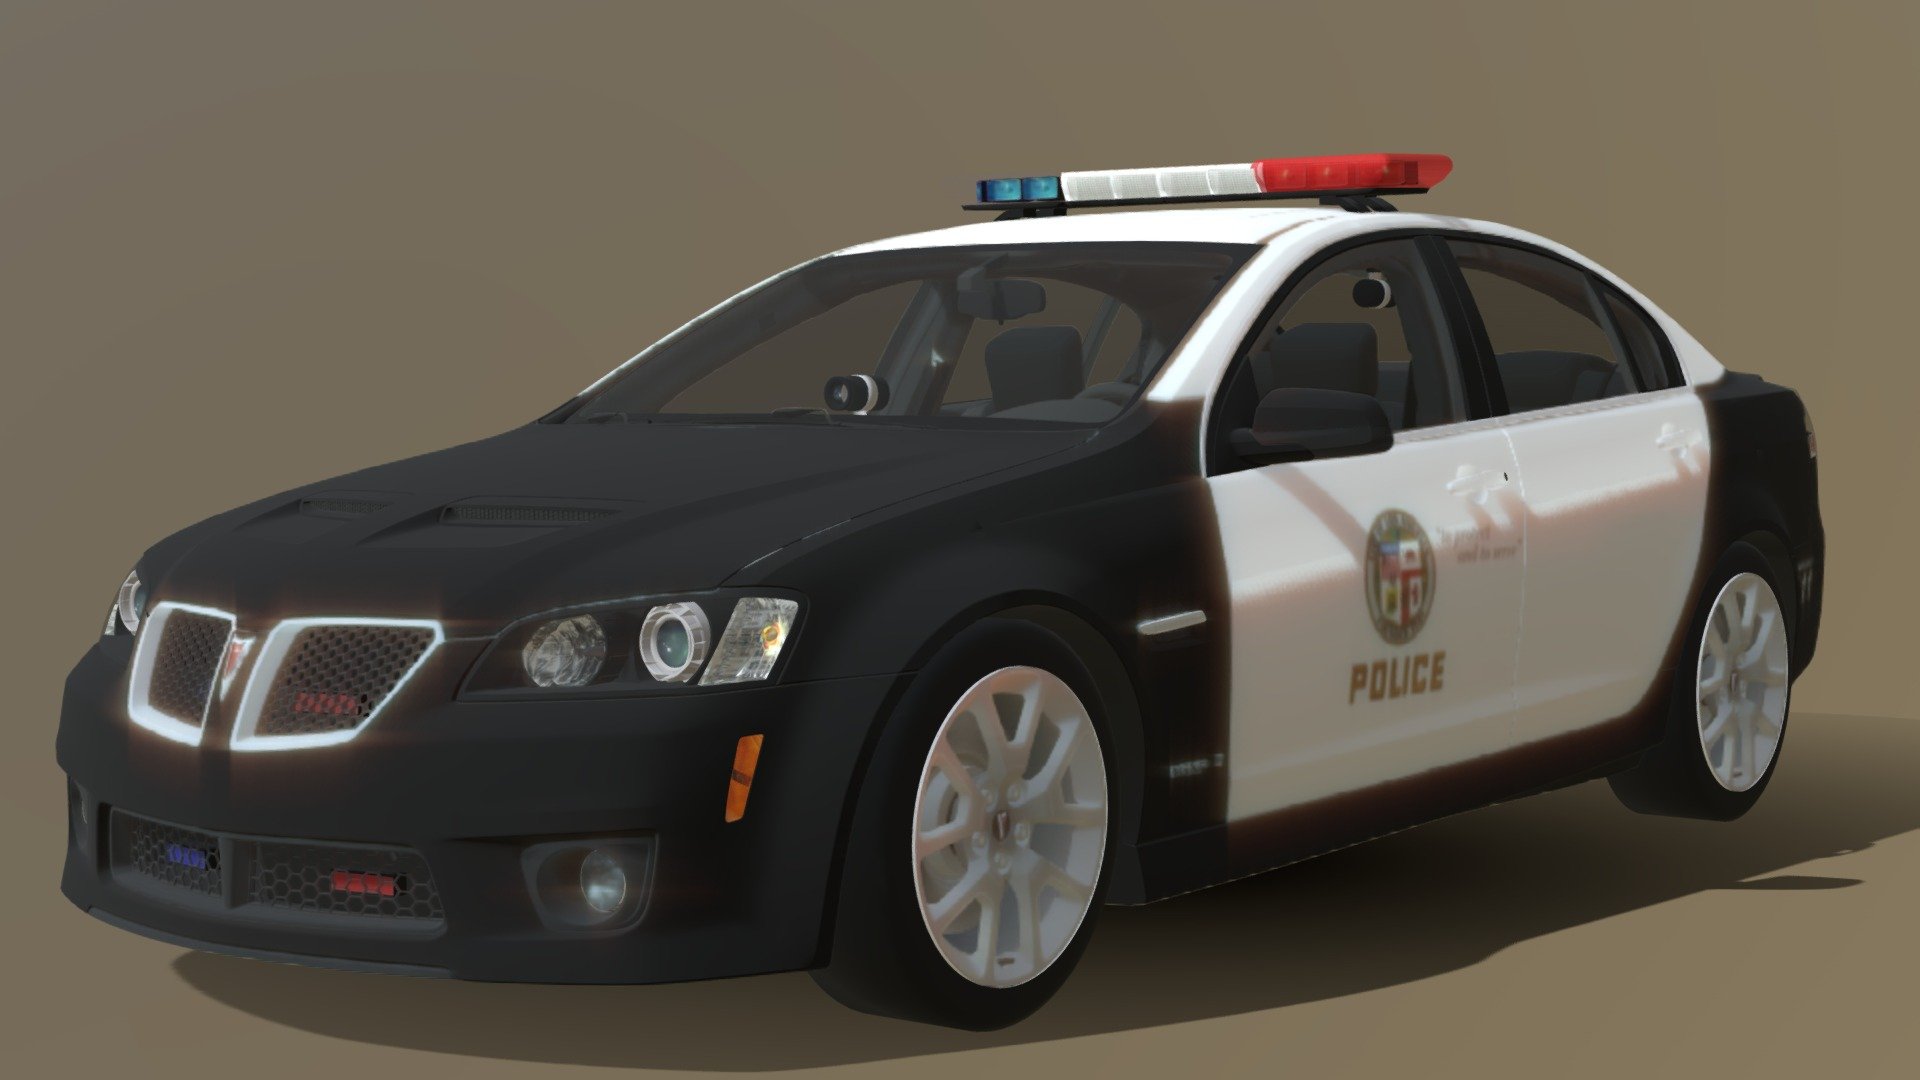 The speeder chase of LAPD! It's a Pontiac G8 GXP! Like speed With Engine V8 - 2011 Pontiac G8 GXP AWD LAPD - 3D model by No Name (@s2newton.09) 3d model